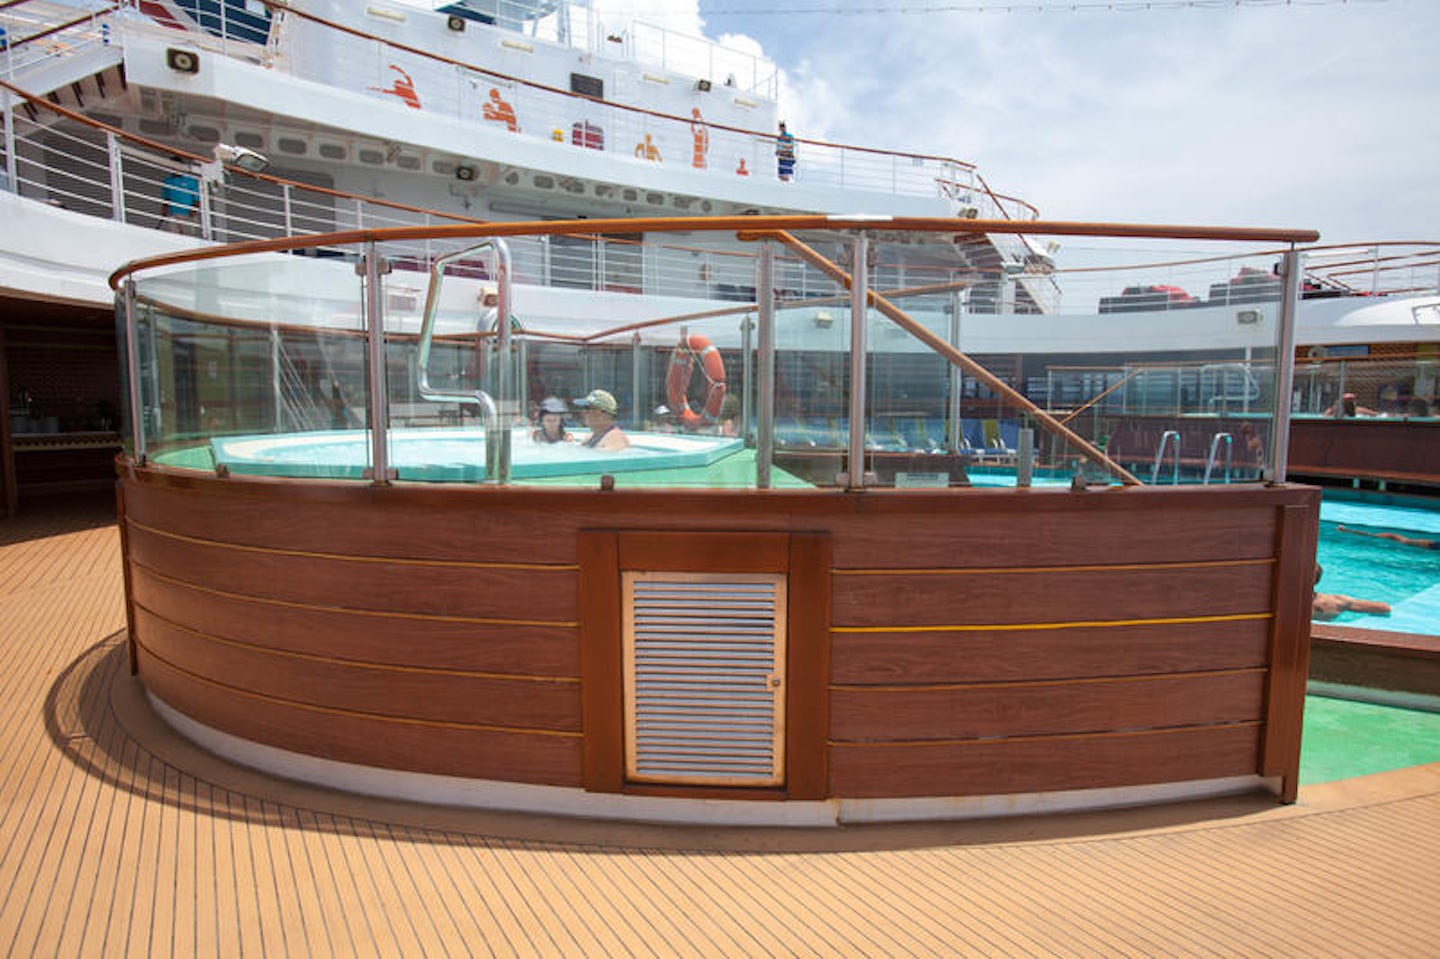 The Lido Deck Whirlpools on Carnival Breeze